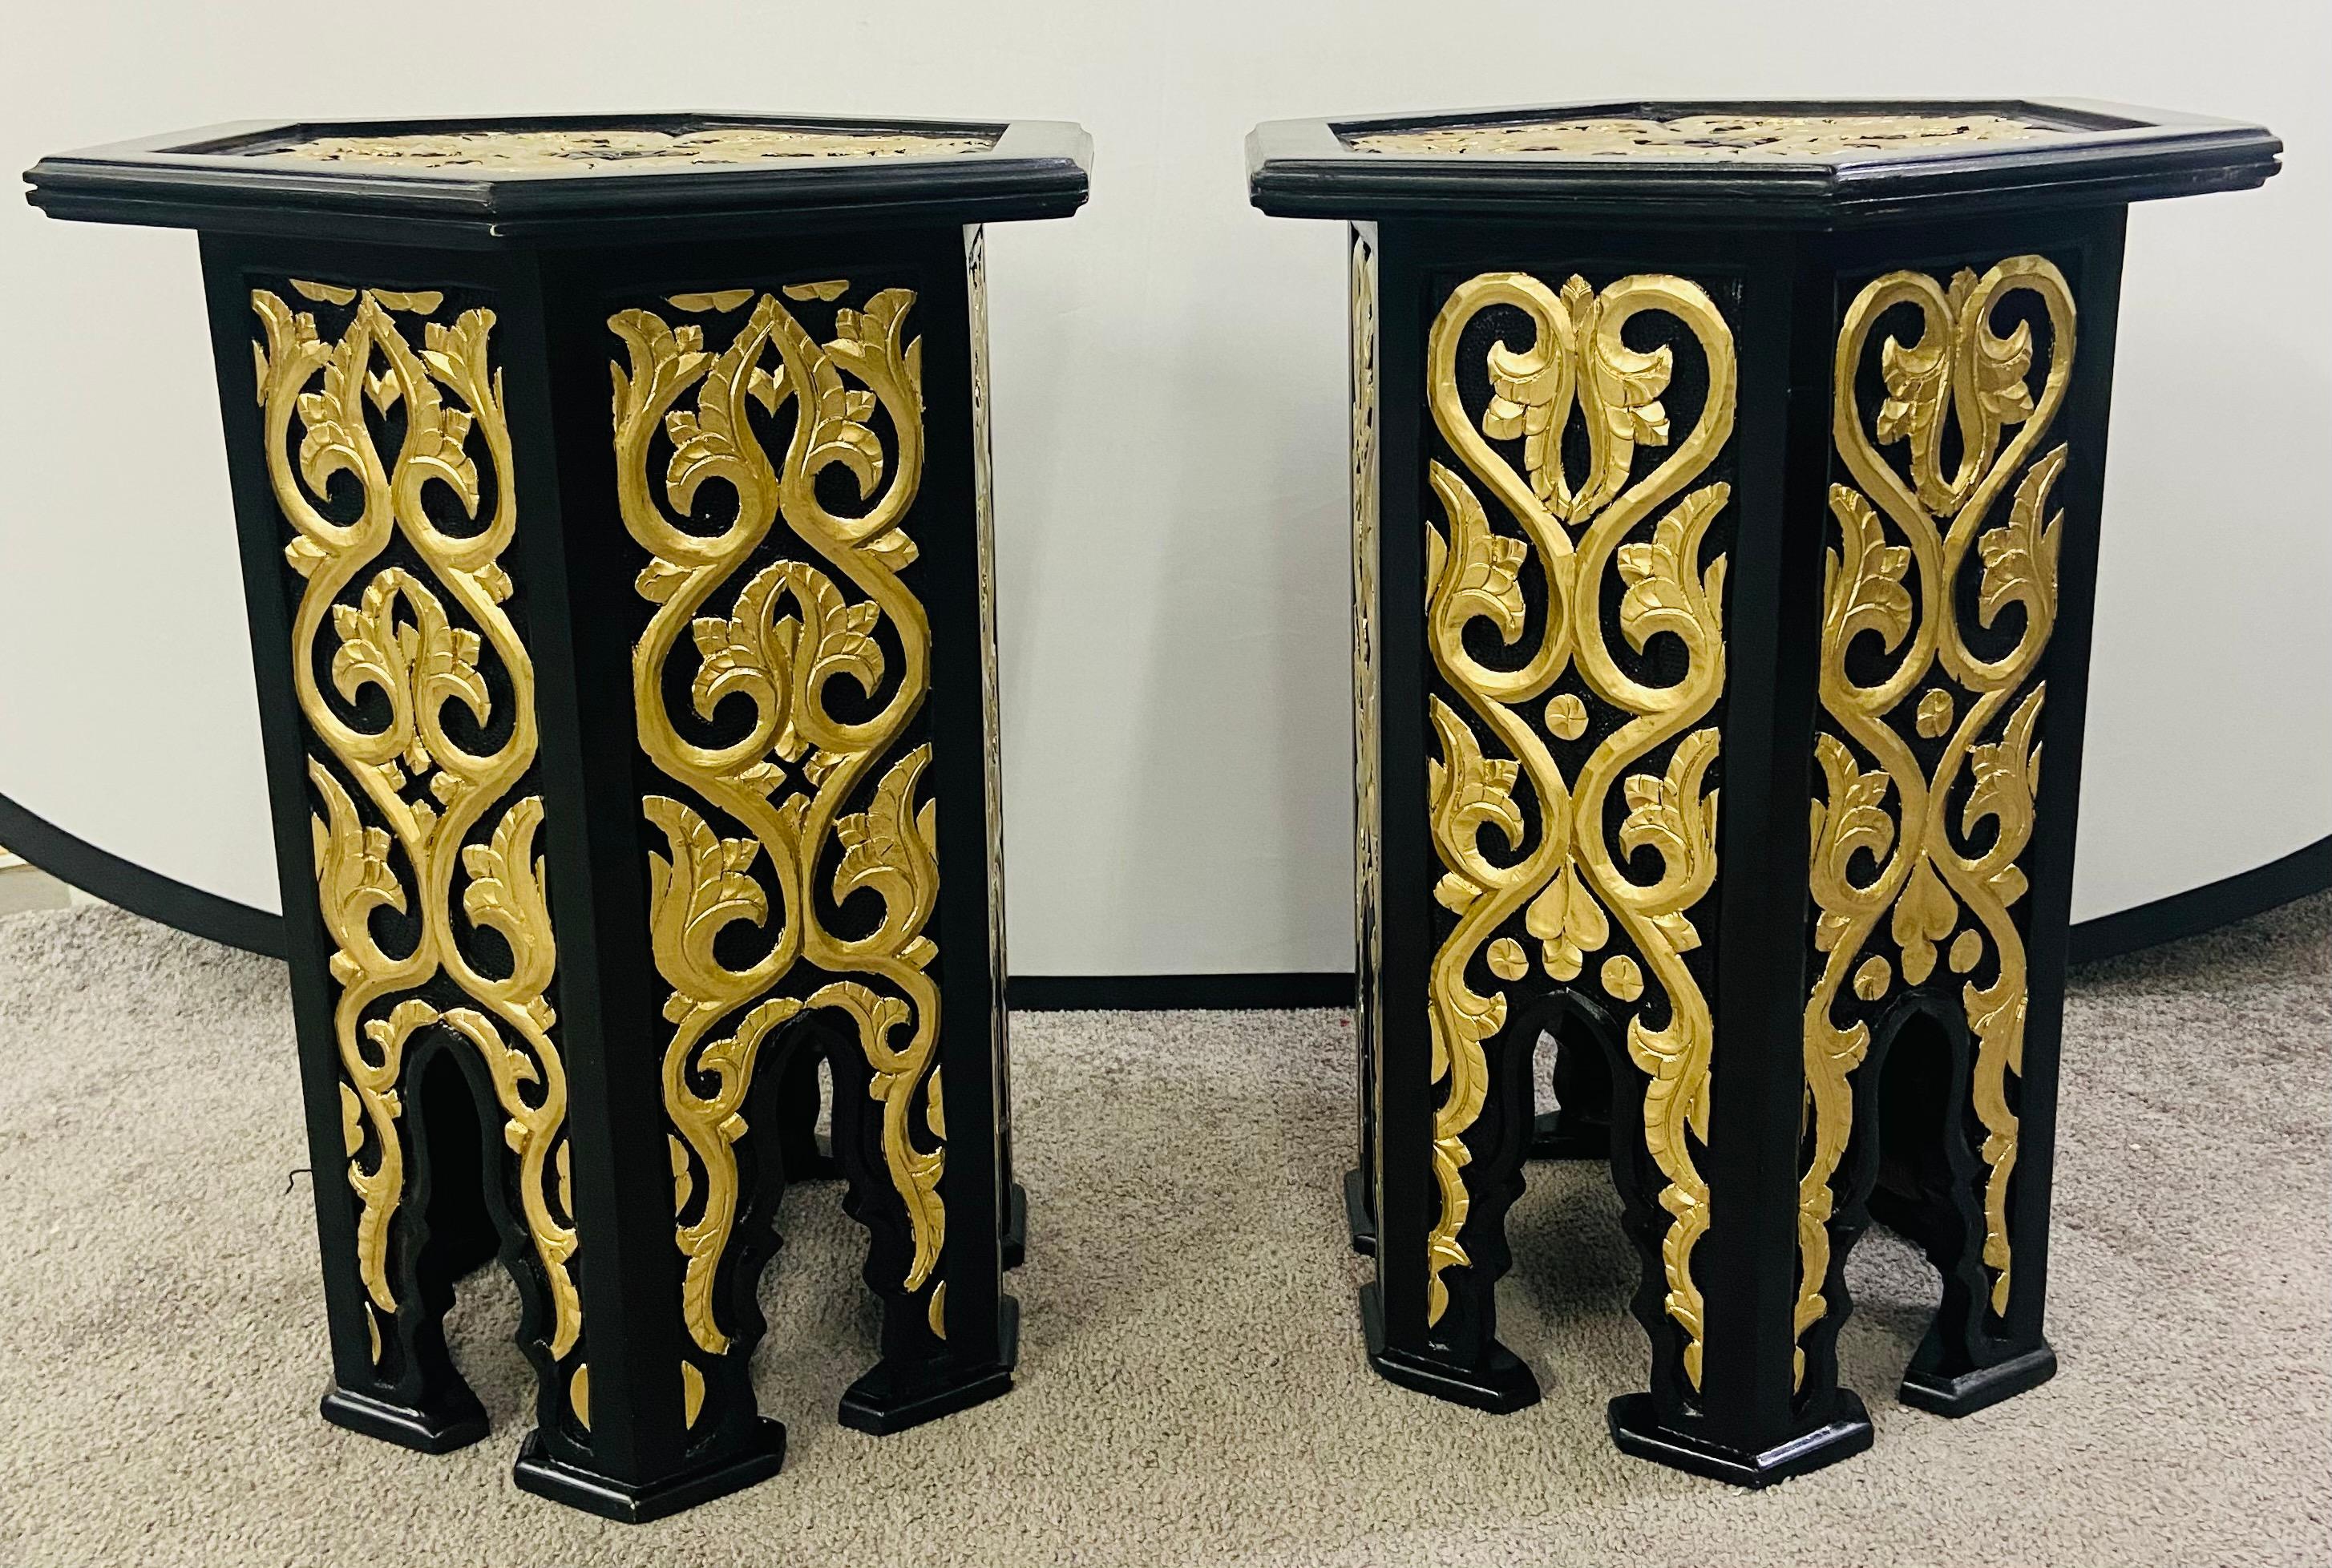 Moorish Hollywood Regency Moroccan Stye Side or End Table Black with Gold Design, a Pair For Sale